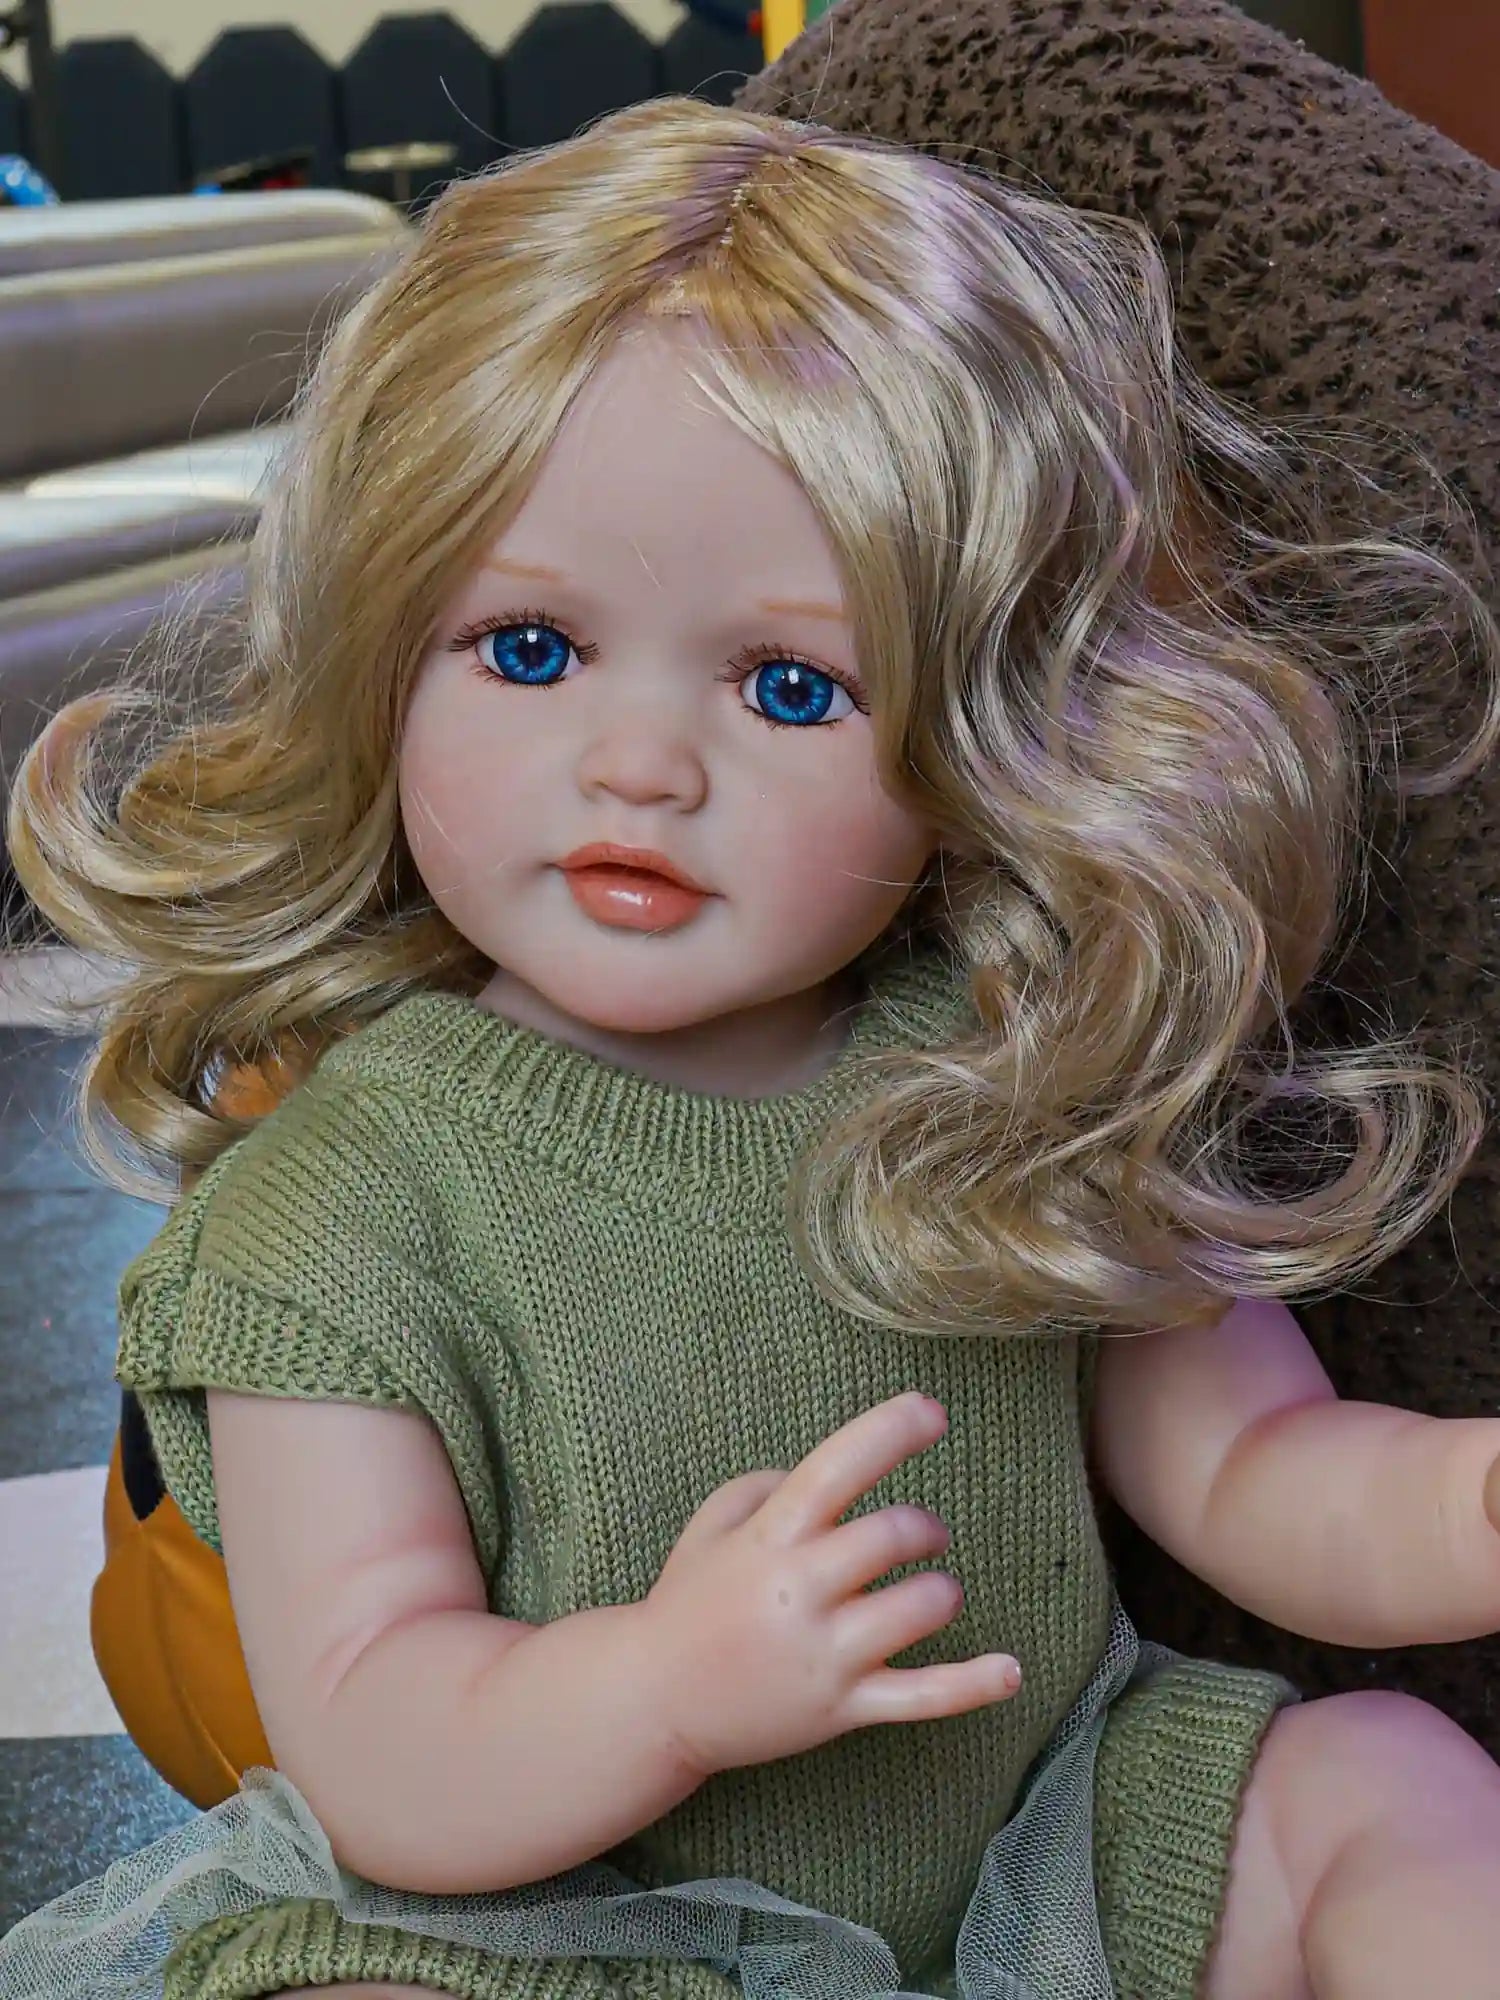 A sitting doll with a lifelike expression, sporting flowing blonde curls, sparkling blue eyes, and a green knitted dress with a ribbon detail.